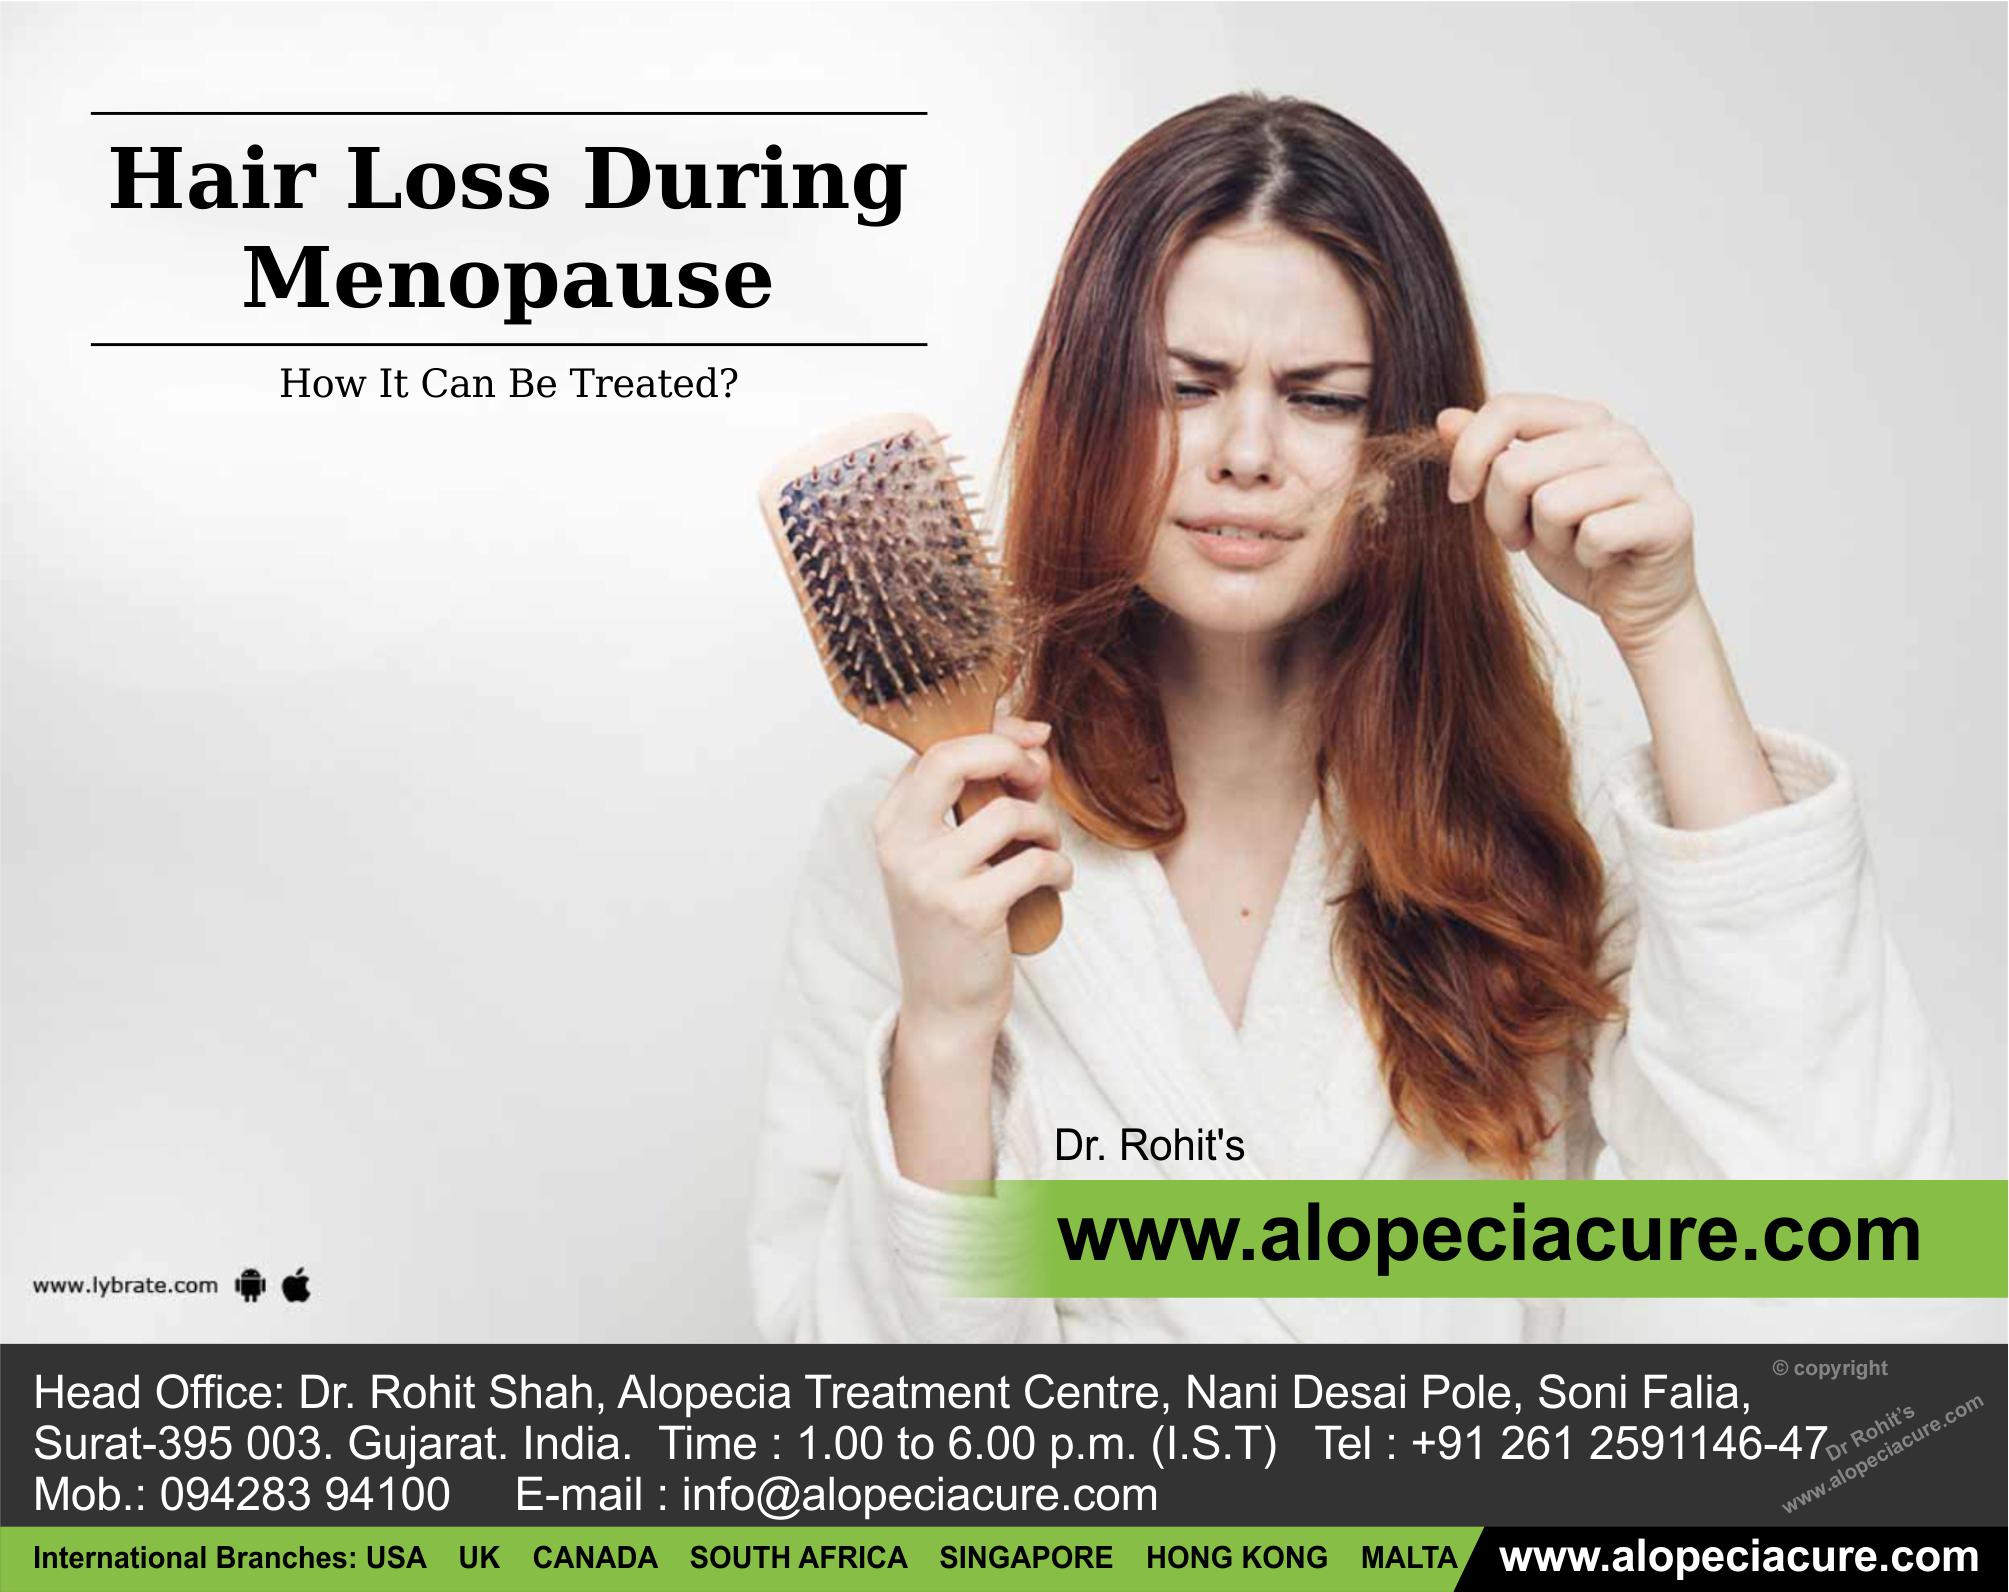 Hair Loss During Menopause - How It Can Be Treated?